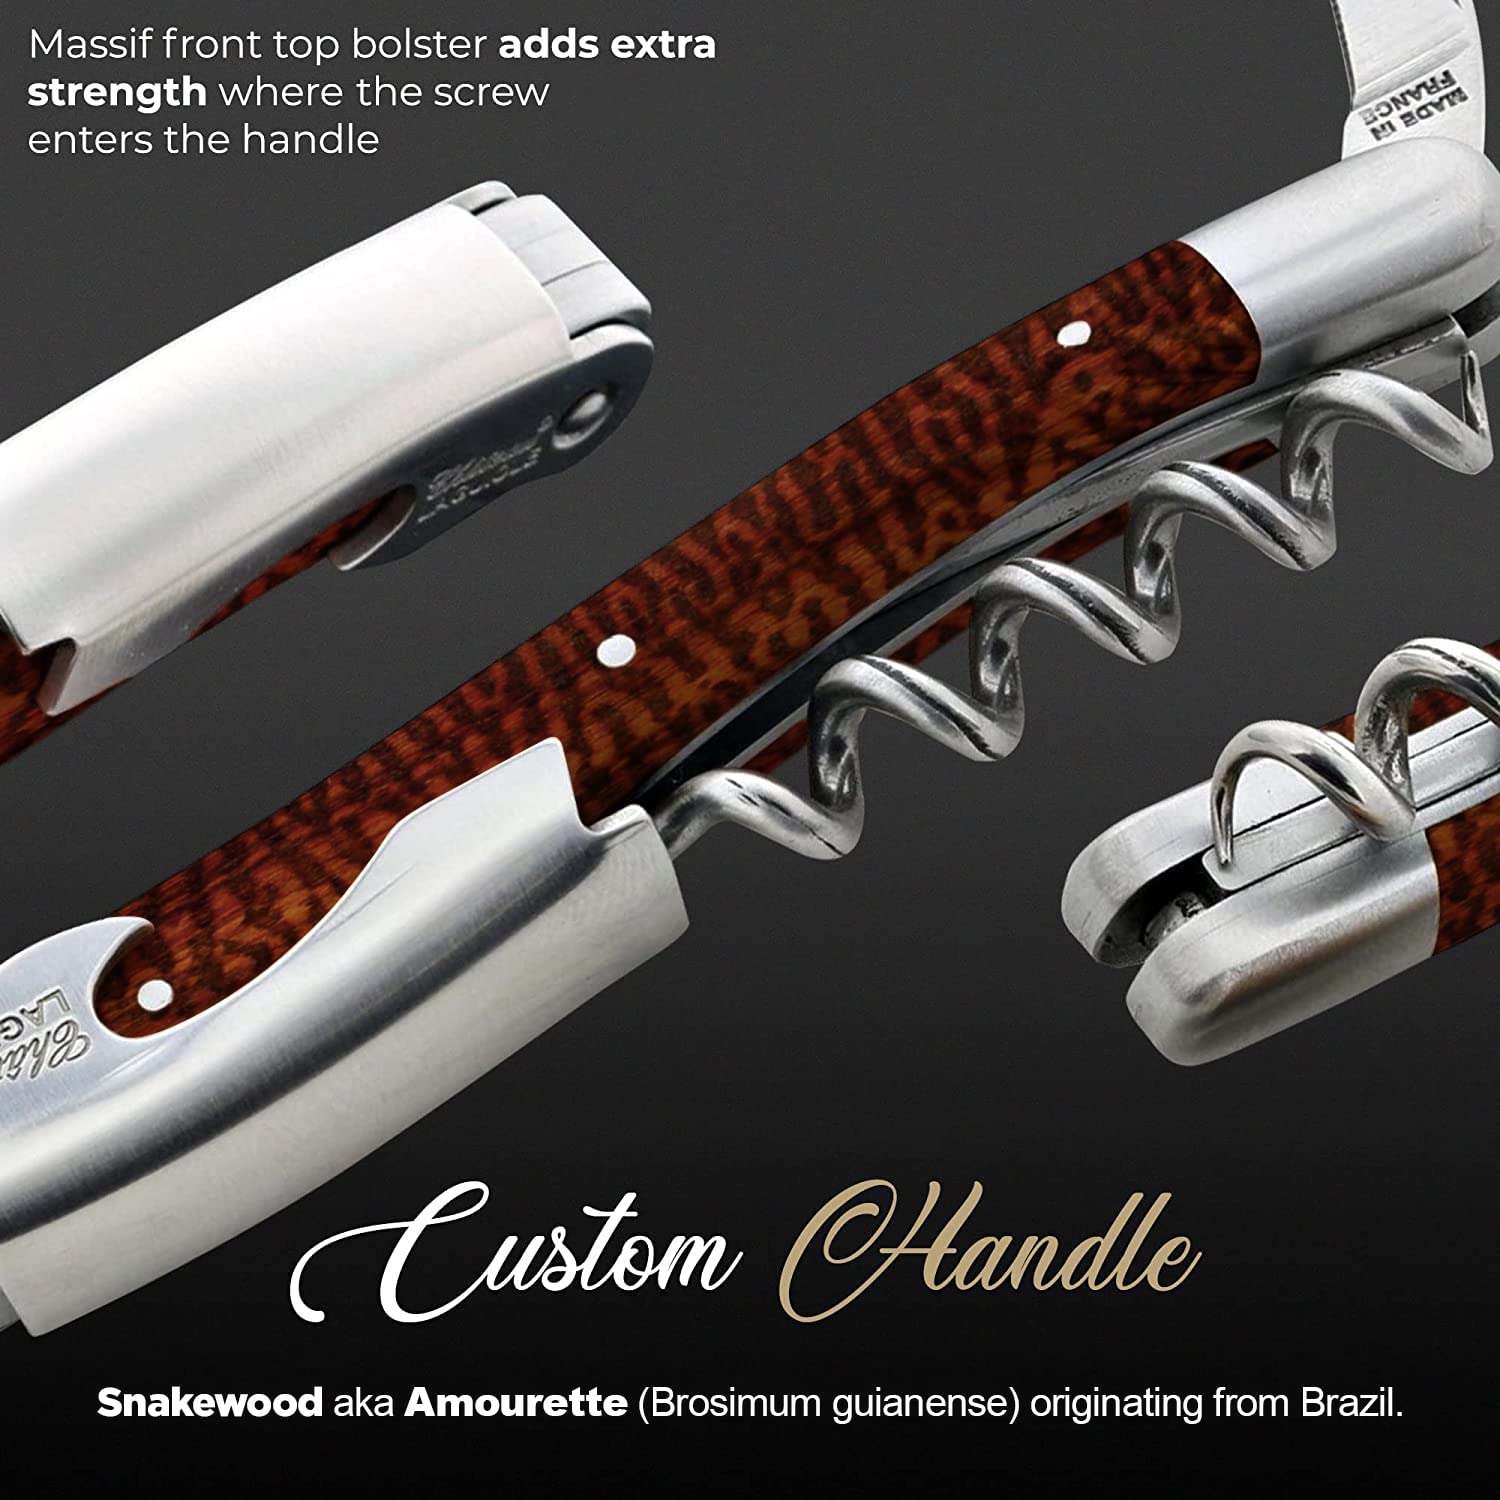 Chateau Laguiole Classic LaGuiole Corkscrew - Snake Wood Luxury Laguiole Wine Opener - Laguiole Wine Key Made in France - Wine Sommelier Wood Handle Wine Corkscrew Includes Leather Sheath & Gift Box